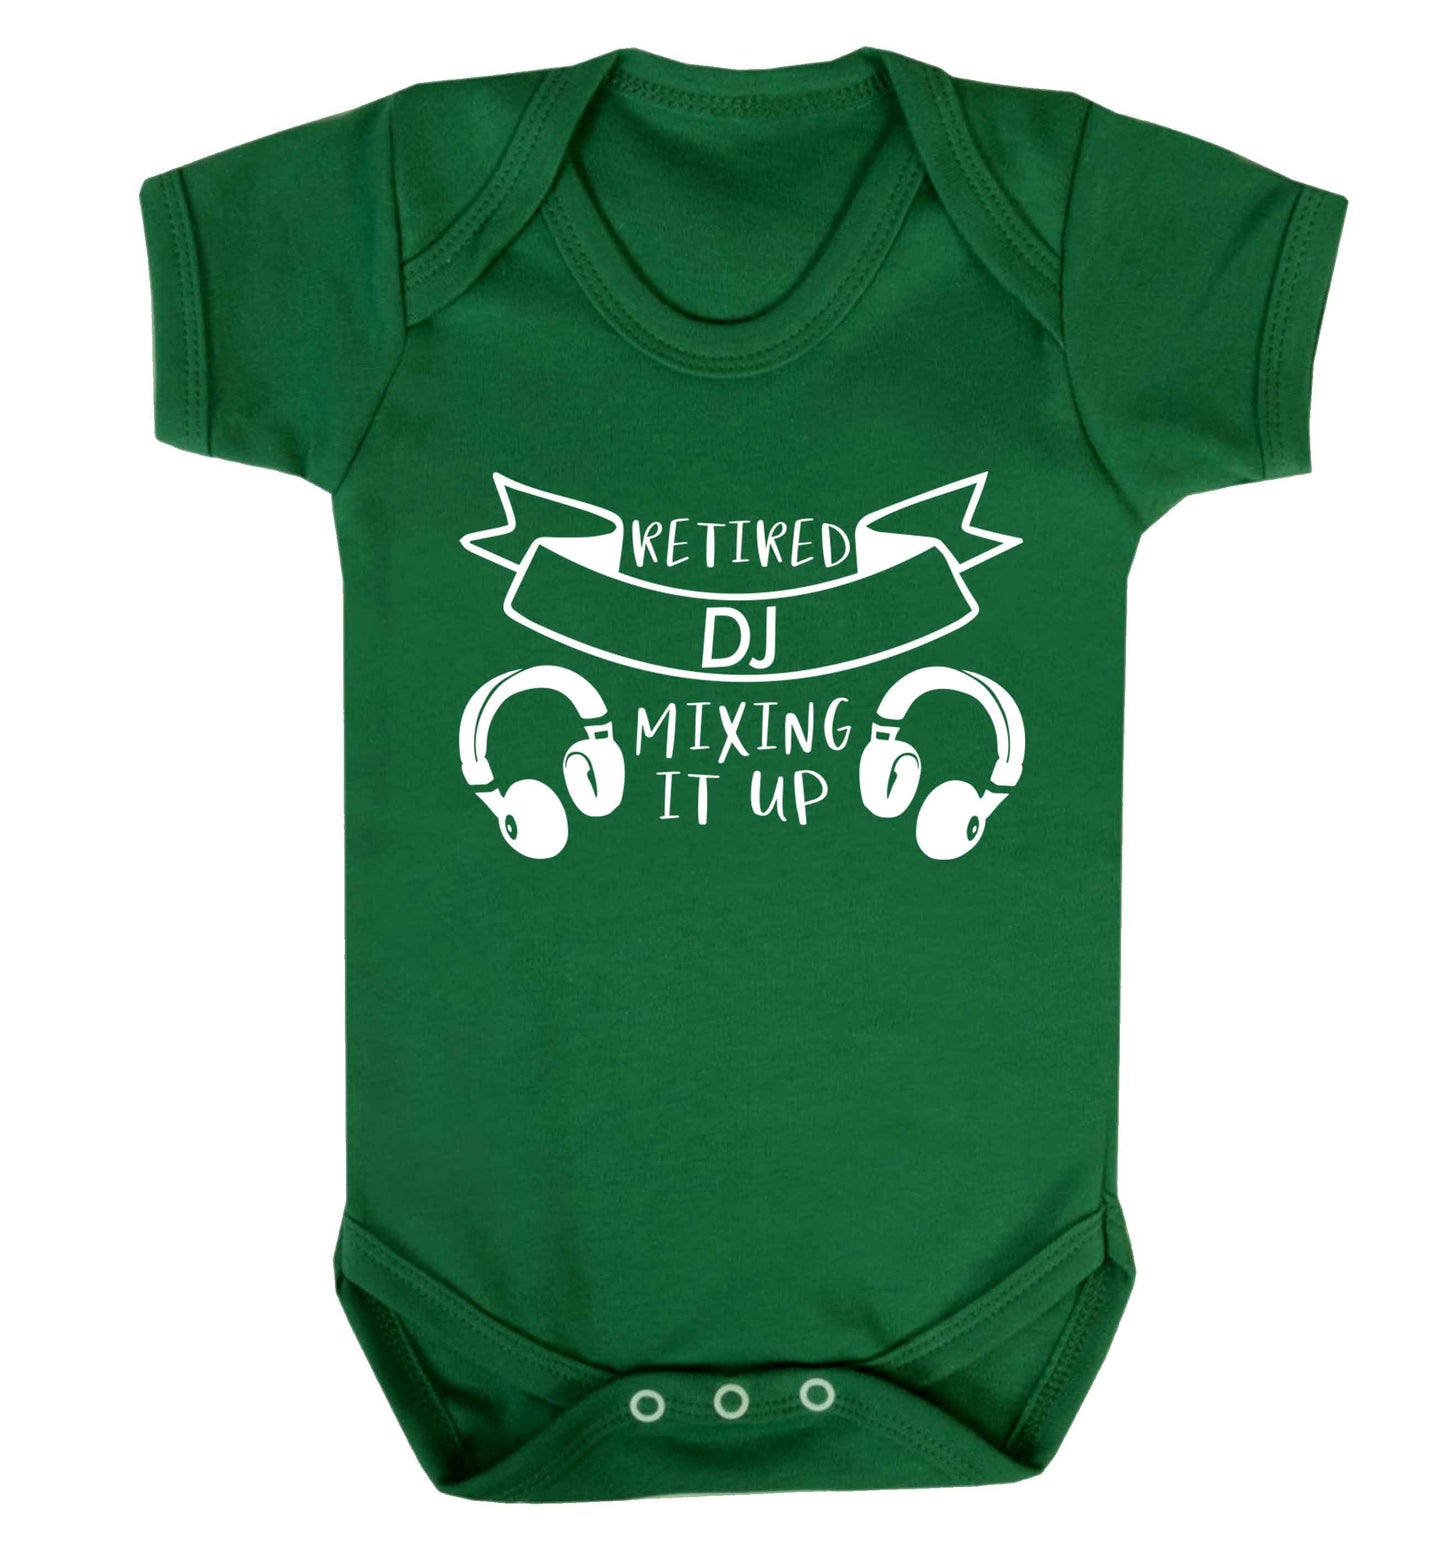 Retired DJ mixing it up Baby Vest green 18-24 months